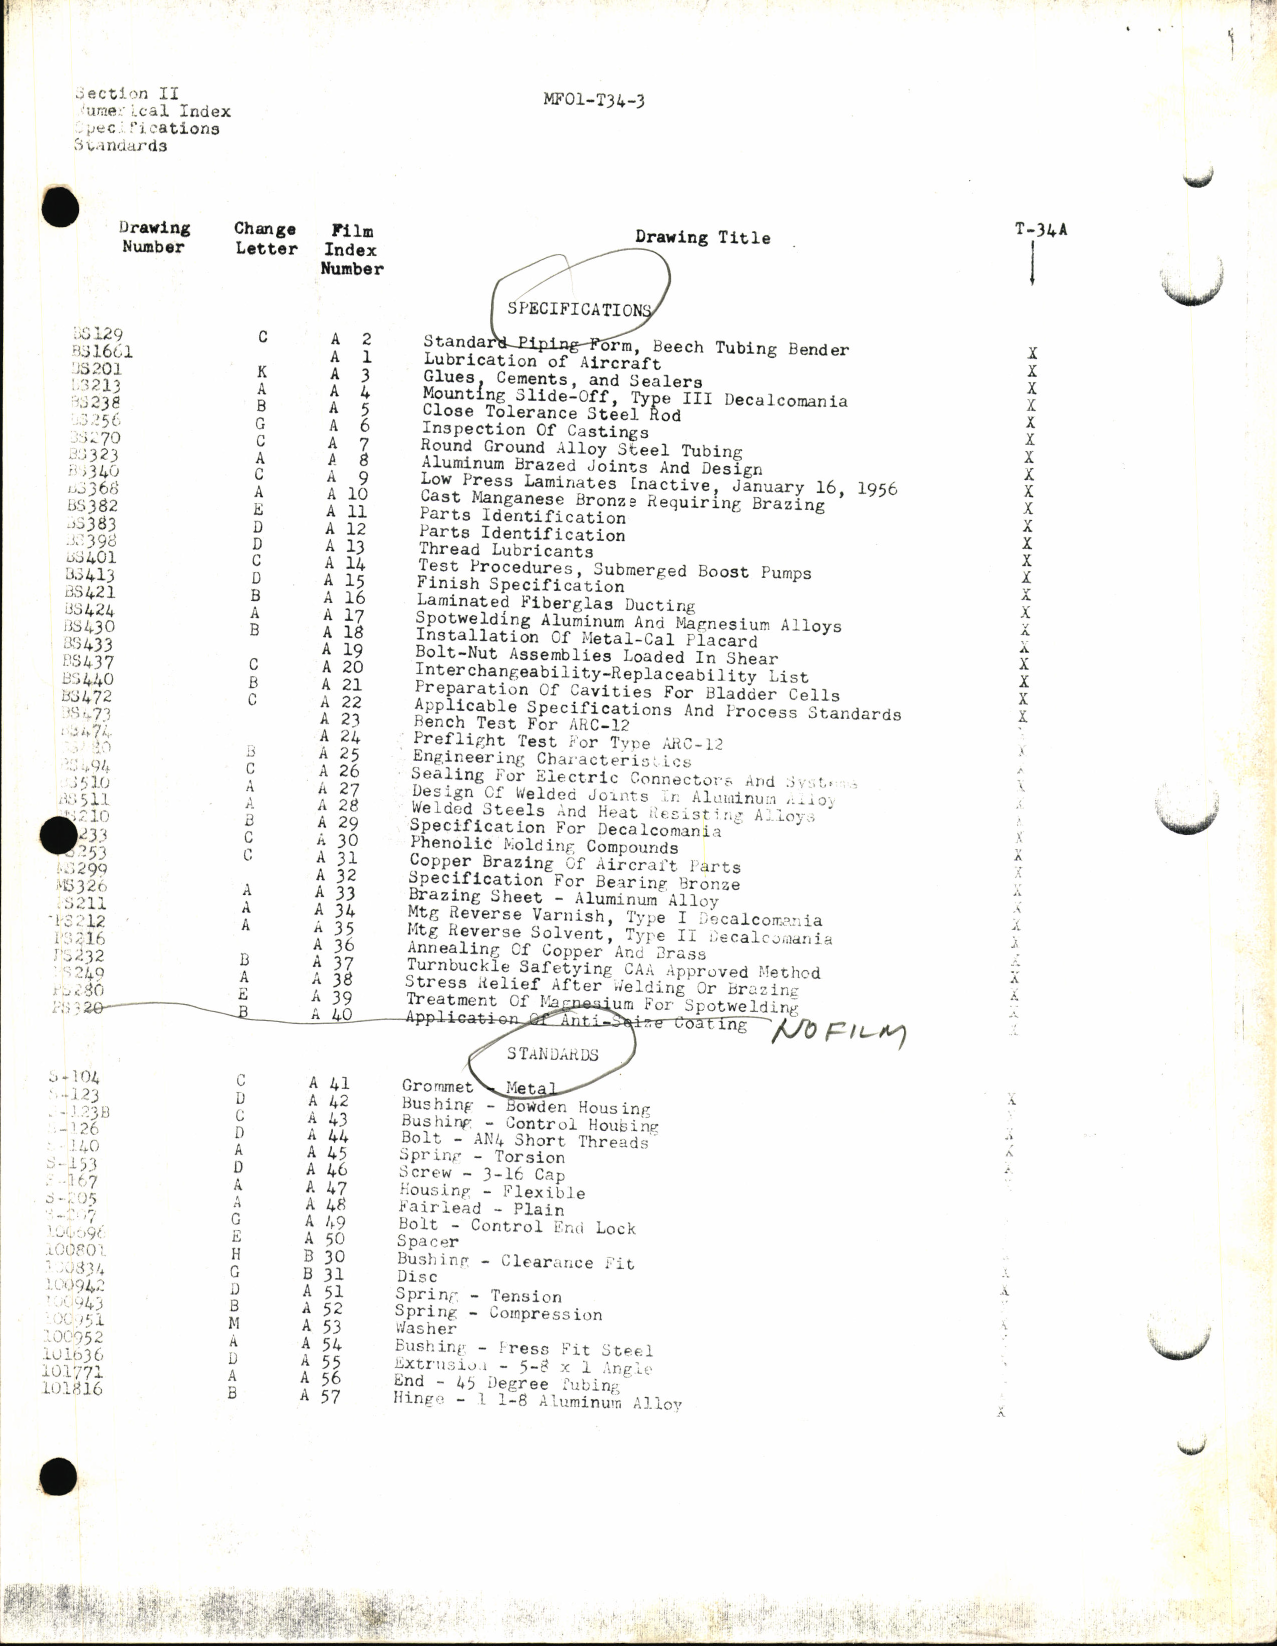 Sample page 6 from AirCorps Library document: Index of Drawings on Microfilm for T-34 Series Aircraft